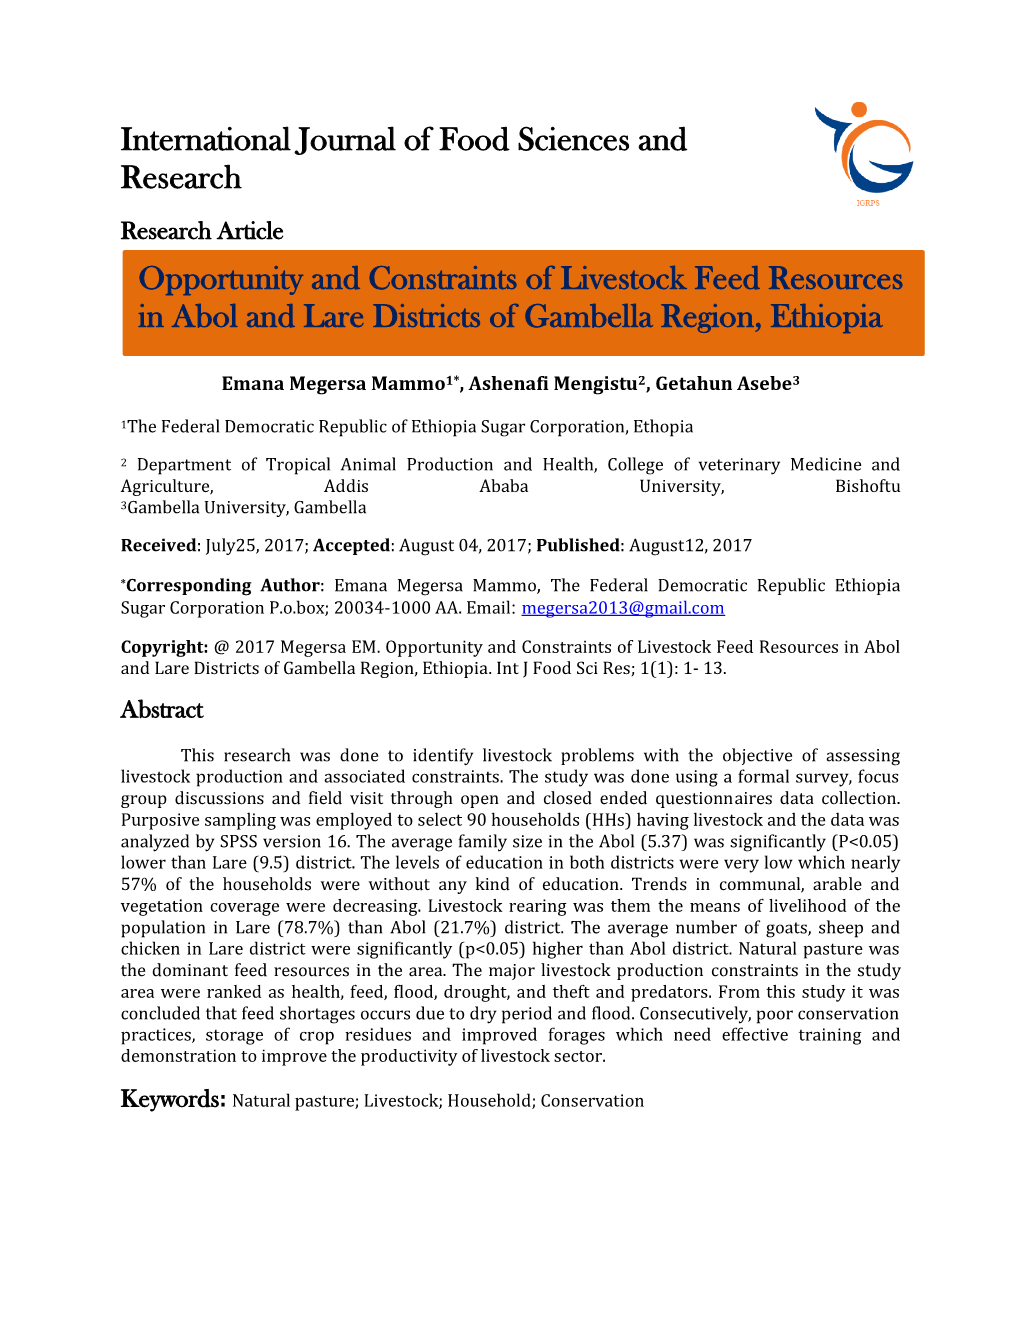 Opportunity and Constraints of Livestock Feed Resources in Abol and Lare Districts of Gambella Region, Ethiopia